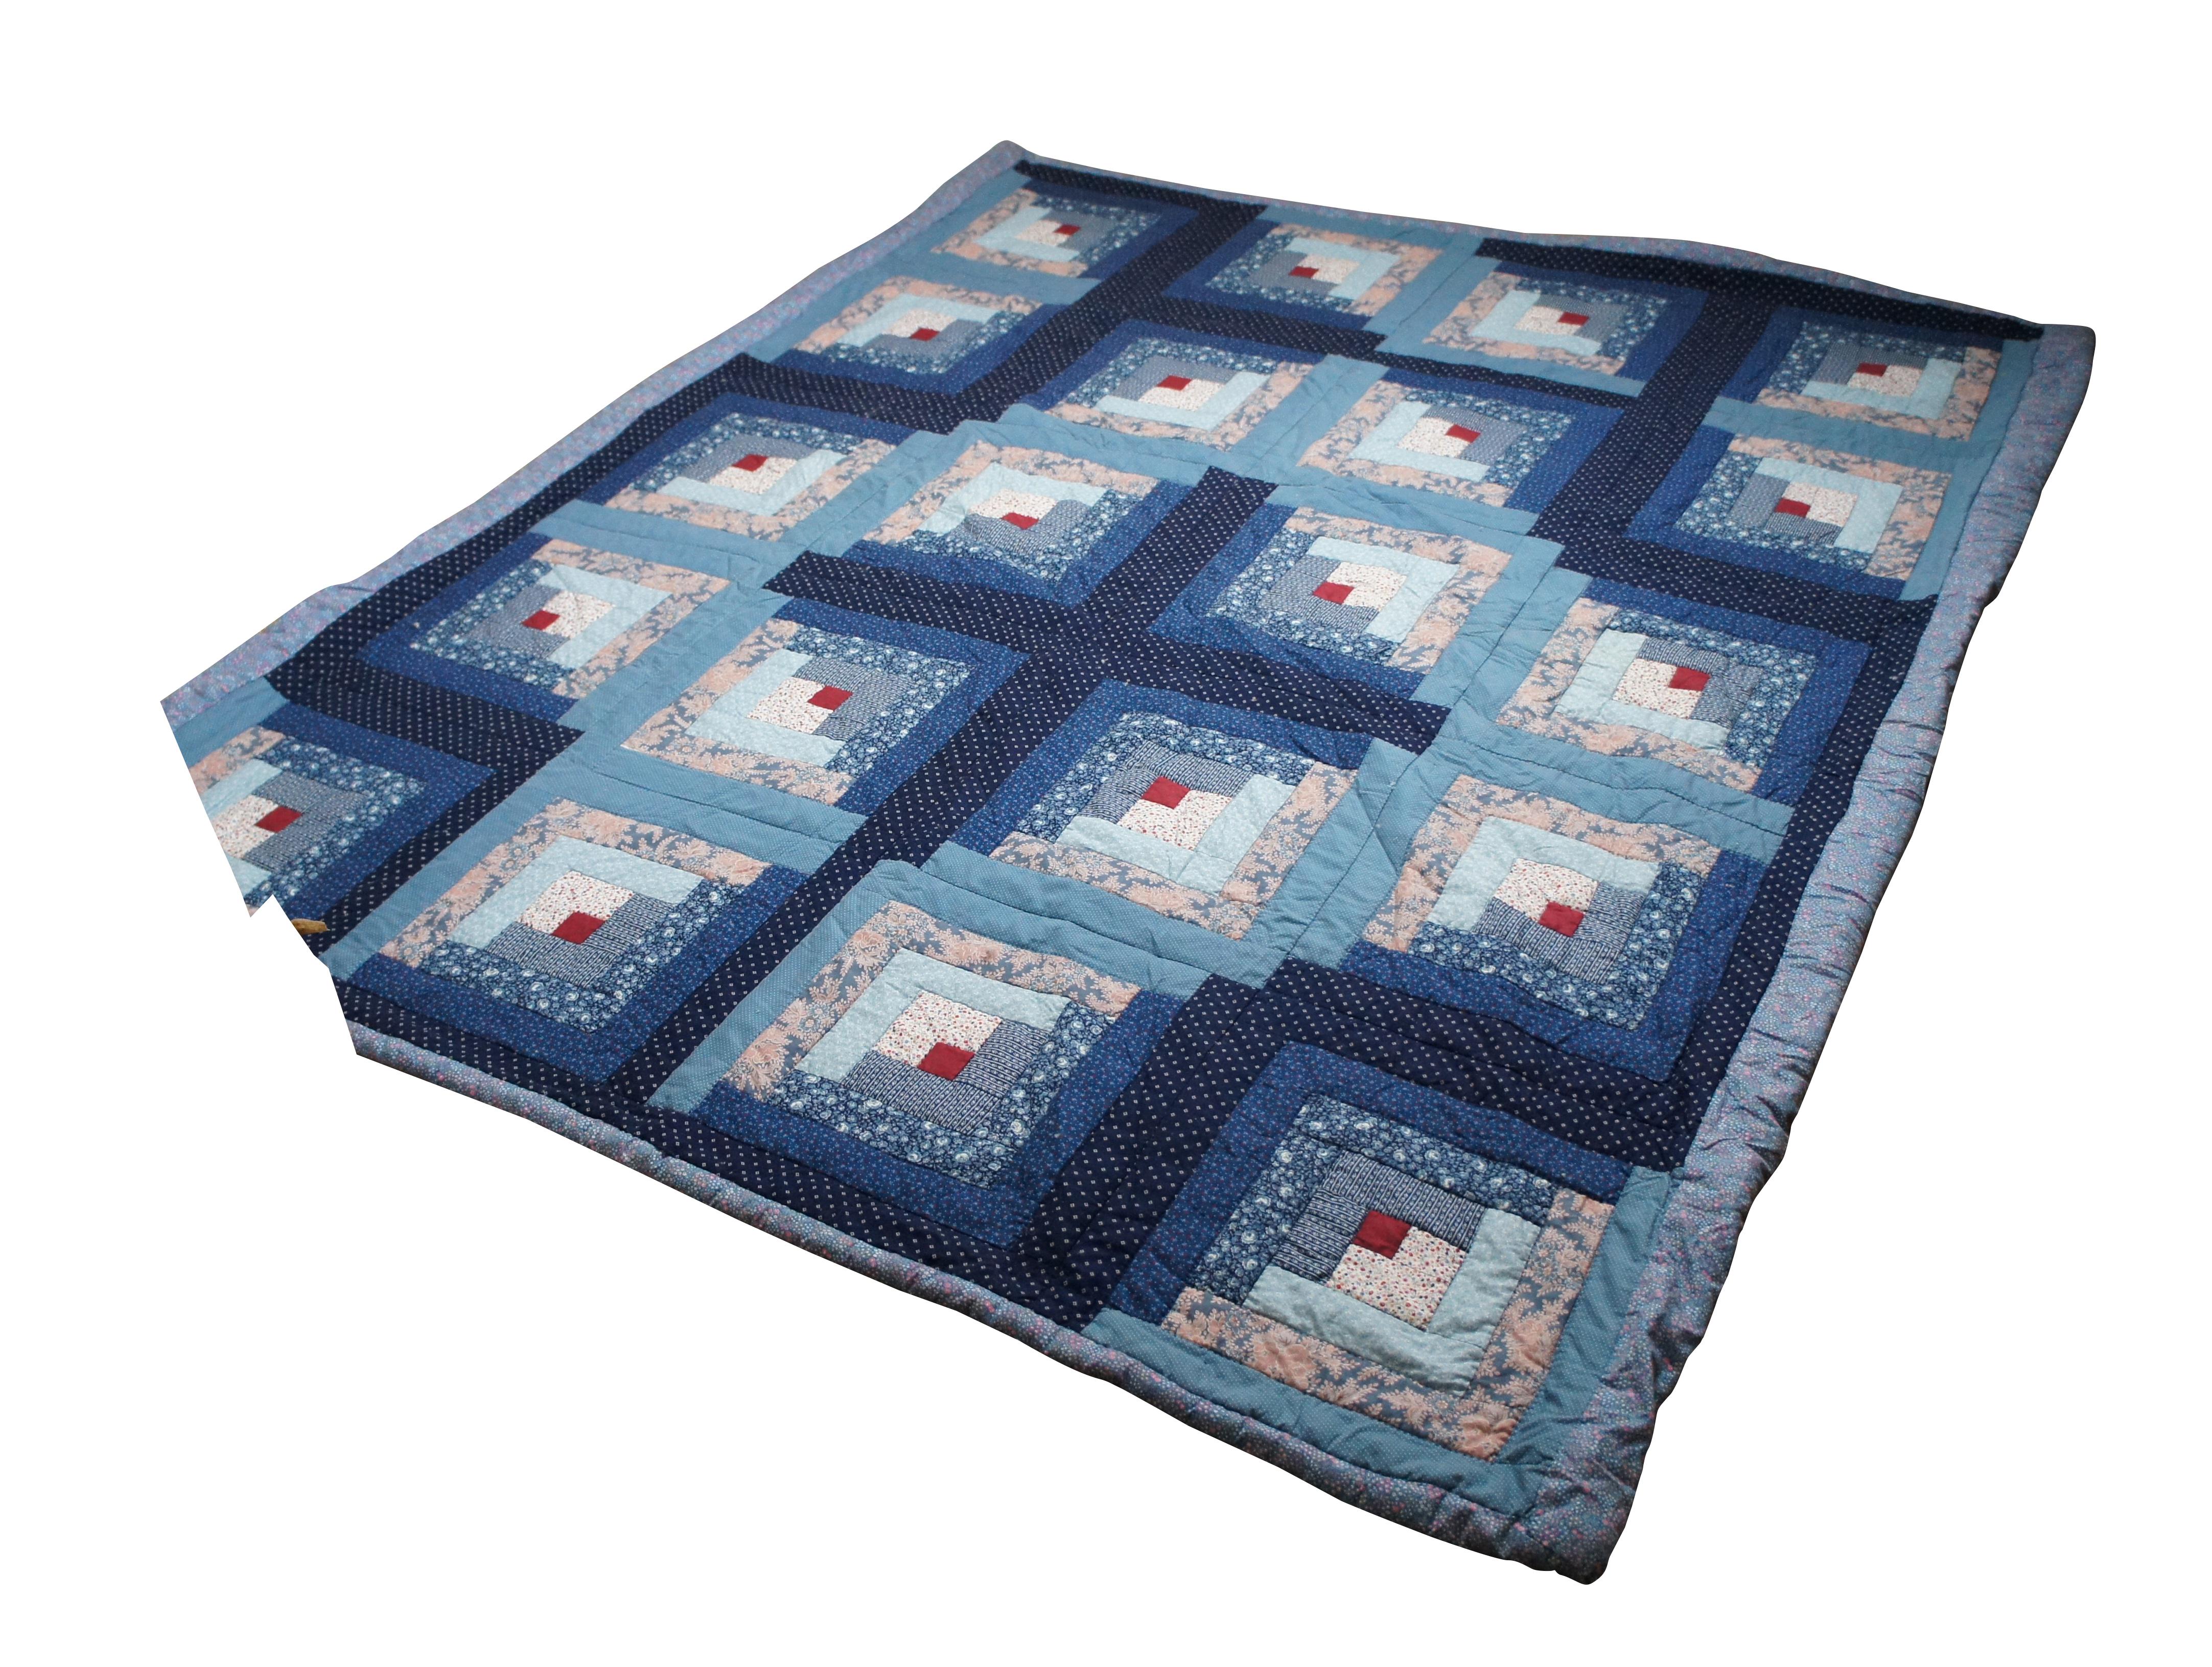 Vintage hand stitched quilt, blanket, comforter, bedspread featuring the traditional Log Cabin geometric design with squares, crosses and floral motifs. Full to queen size.

The Log Cabin block pattern is the oldest of quilt designs, and perhaps the